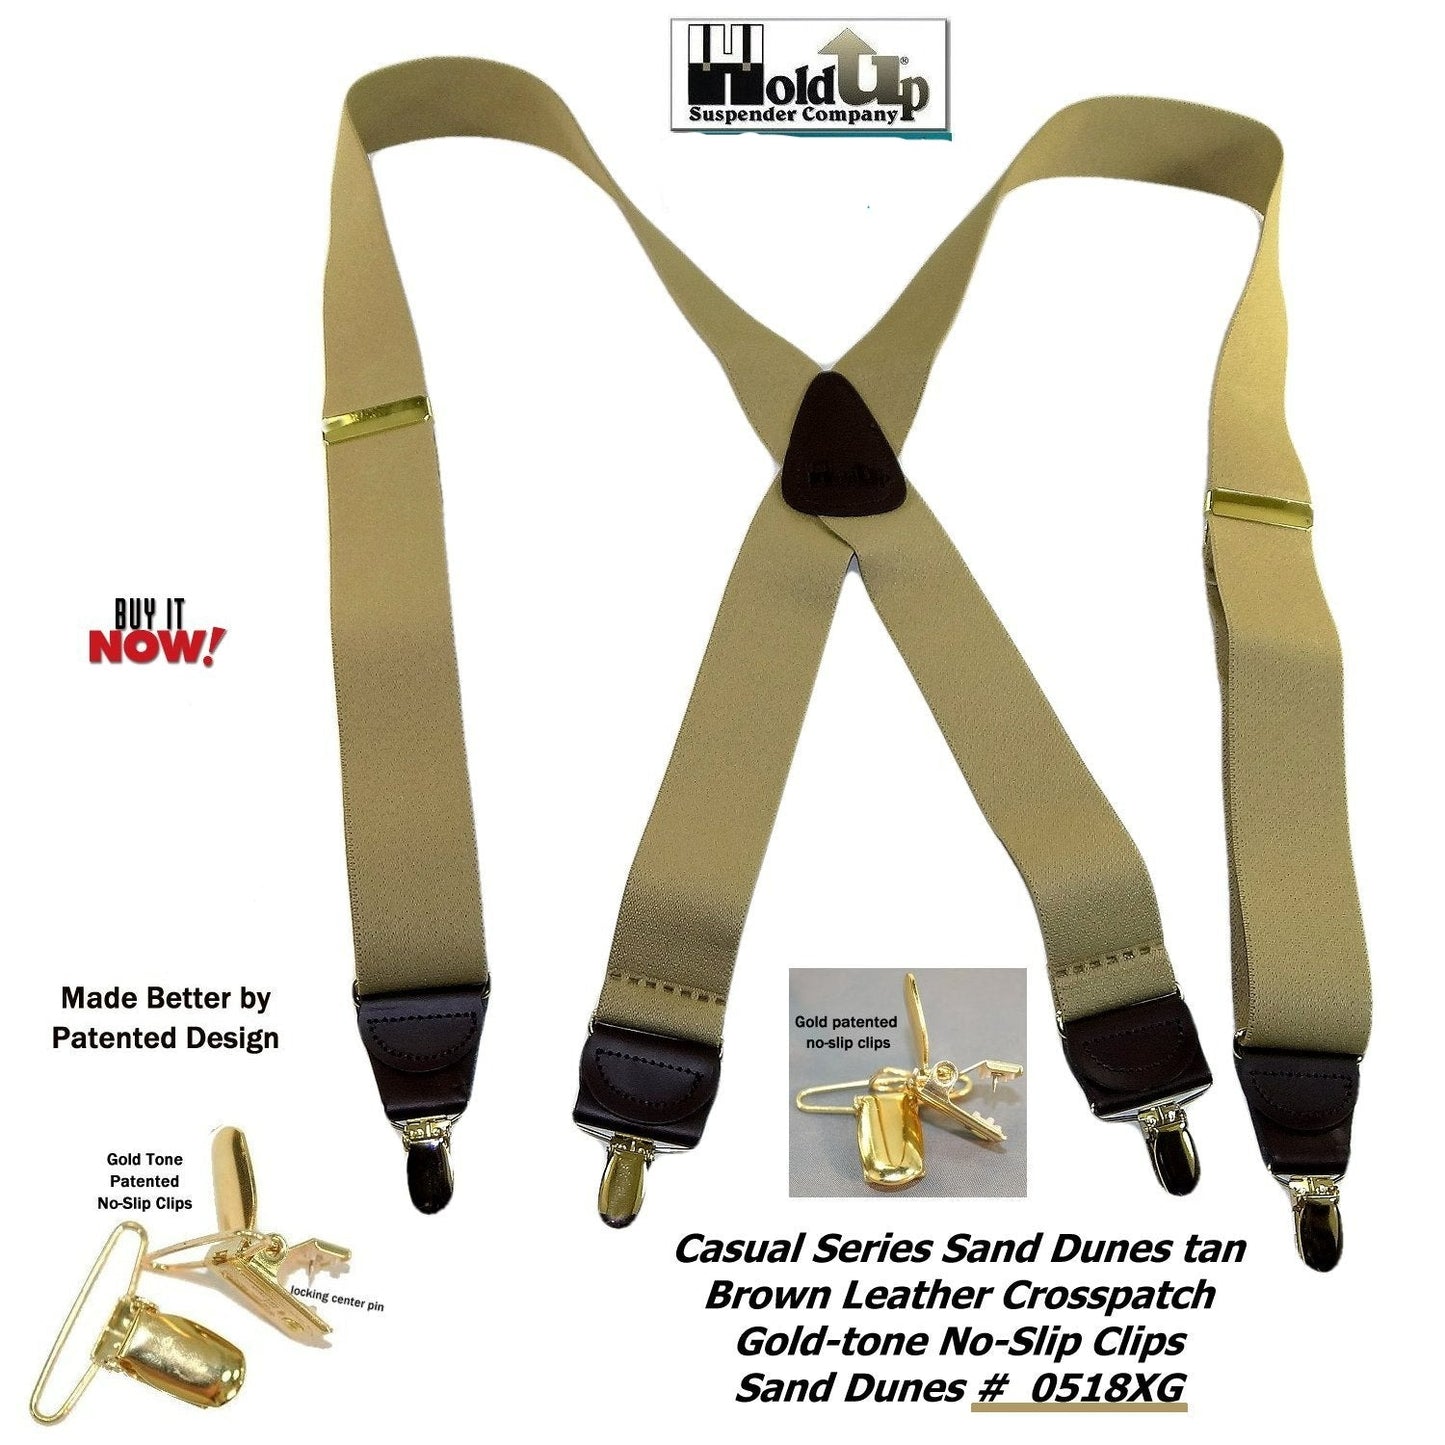 HoldUp Casual Series Sand Dunes Tan 1 1/2" wide Suspenders in X-back with USA Patented No-slip Gold-tone Clips